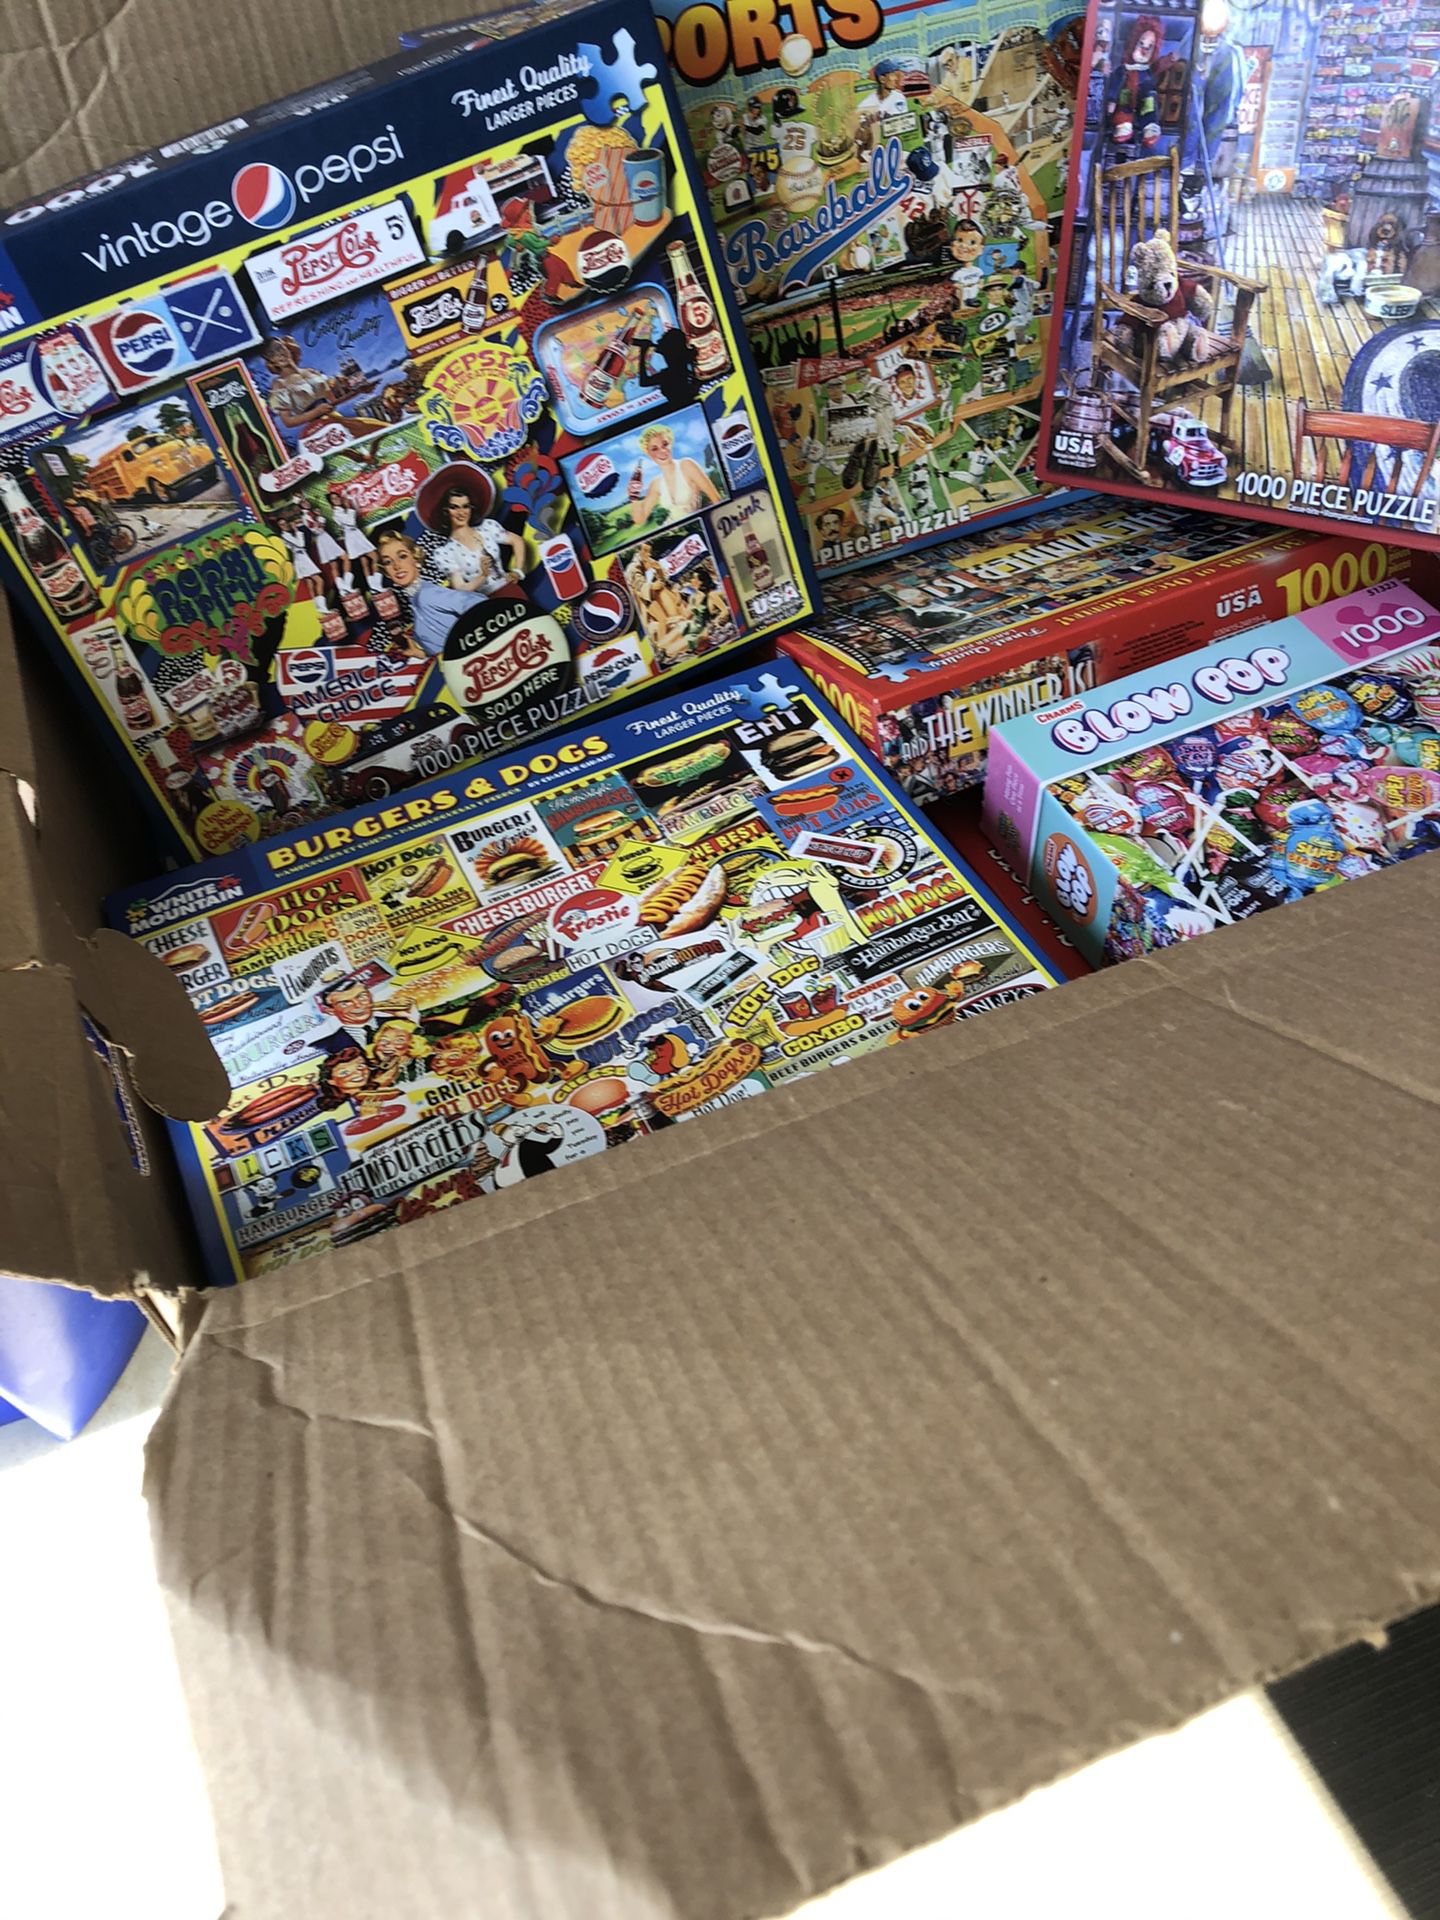 Many 1000 piece puzzles 5.00 each